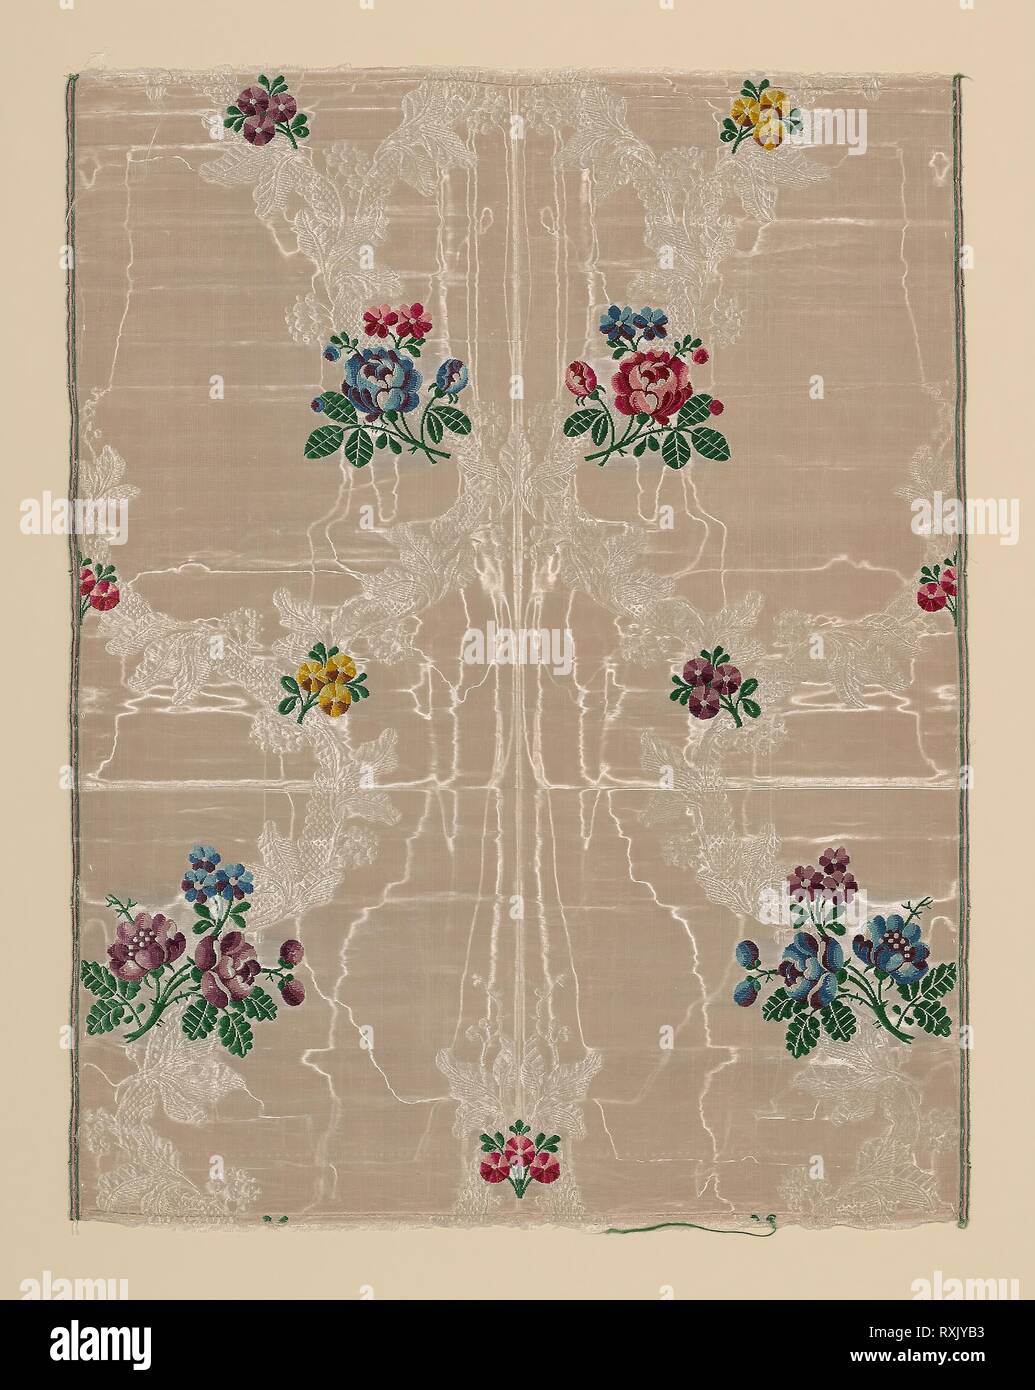 Panel. England, Spitalfields. Date: 1752-1755. Dimensions: 63.3 x 49.1 cm (25 x 19 1/4 in.). Silk, plain weave with supplementary brocading wefts and self-patterned by ground weft floats; watered (moiré). Origin: Spitalfields. Museum: The Chicago Art Institute. Stock Photo